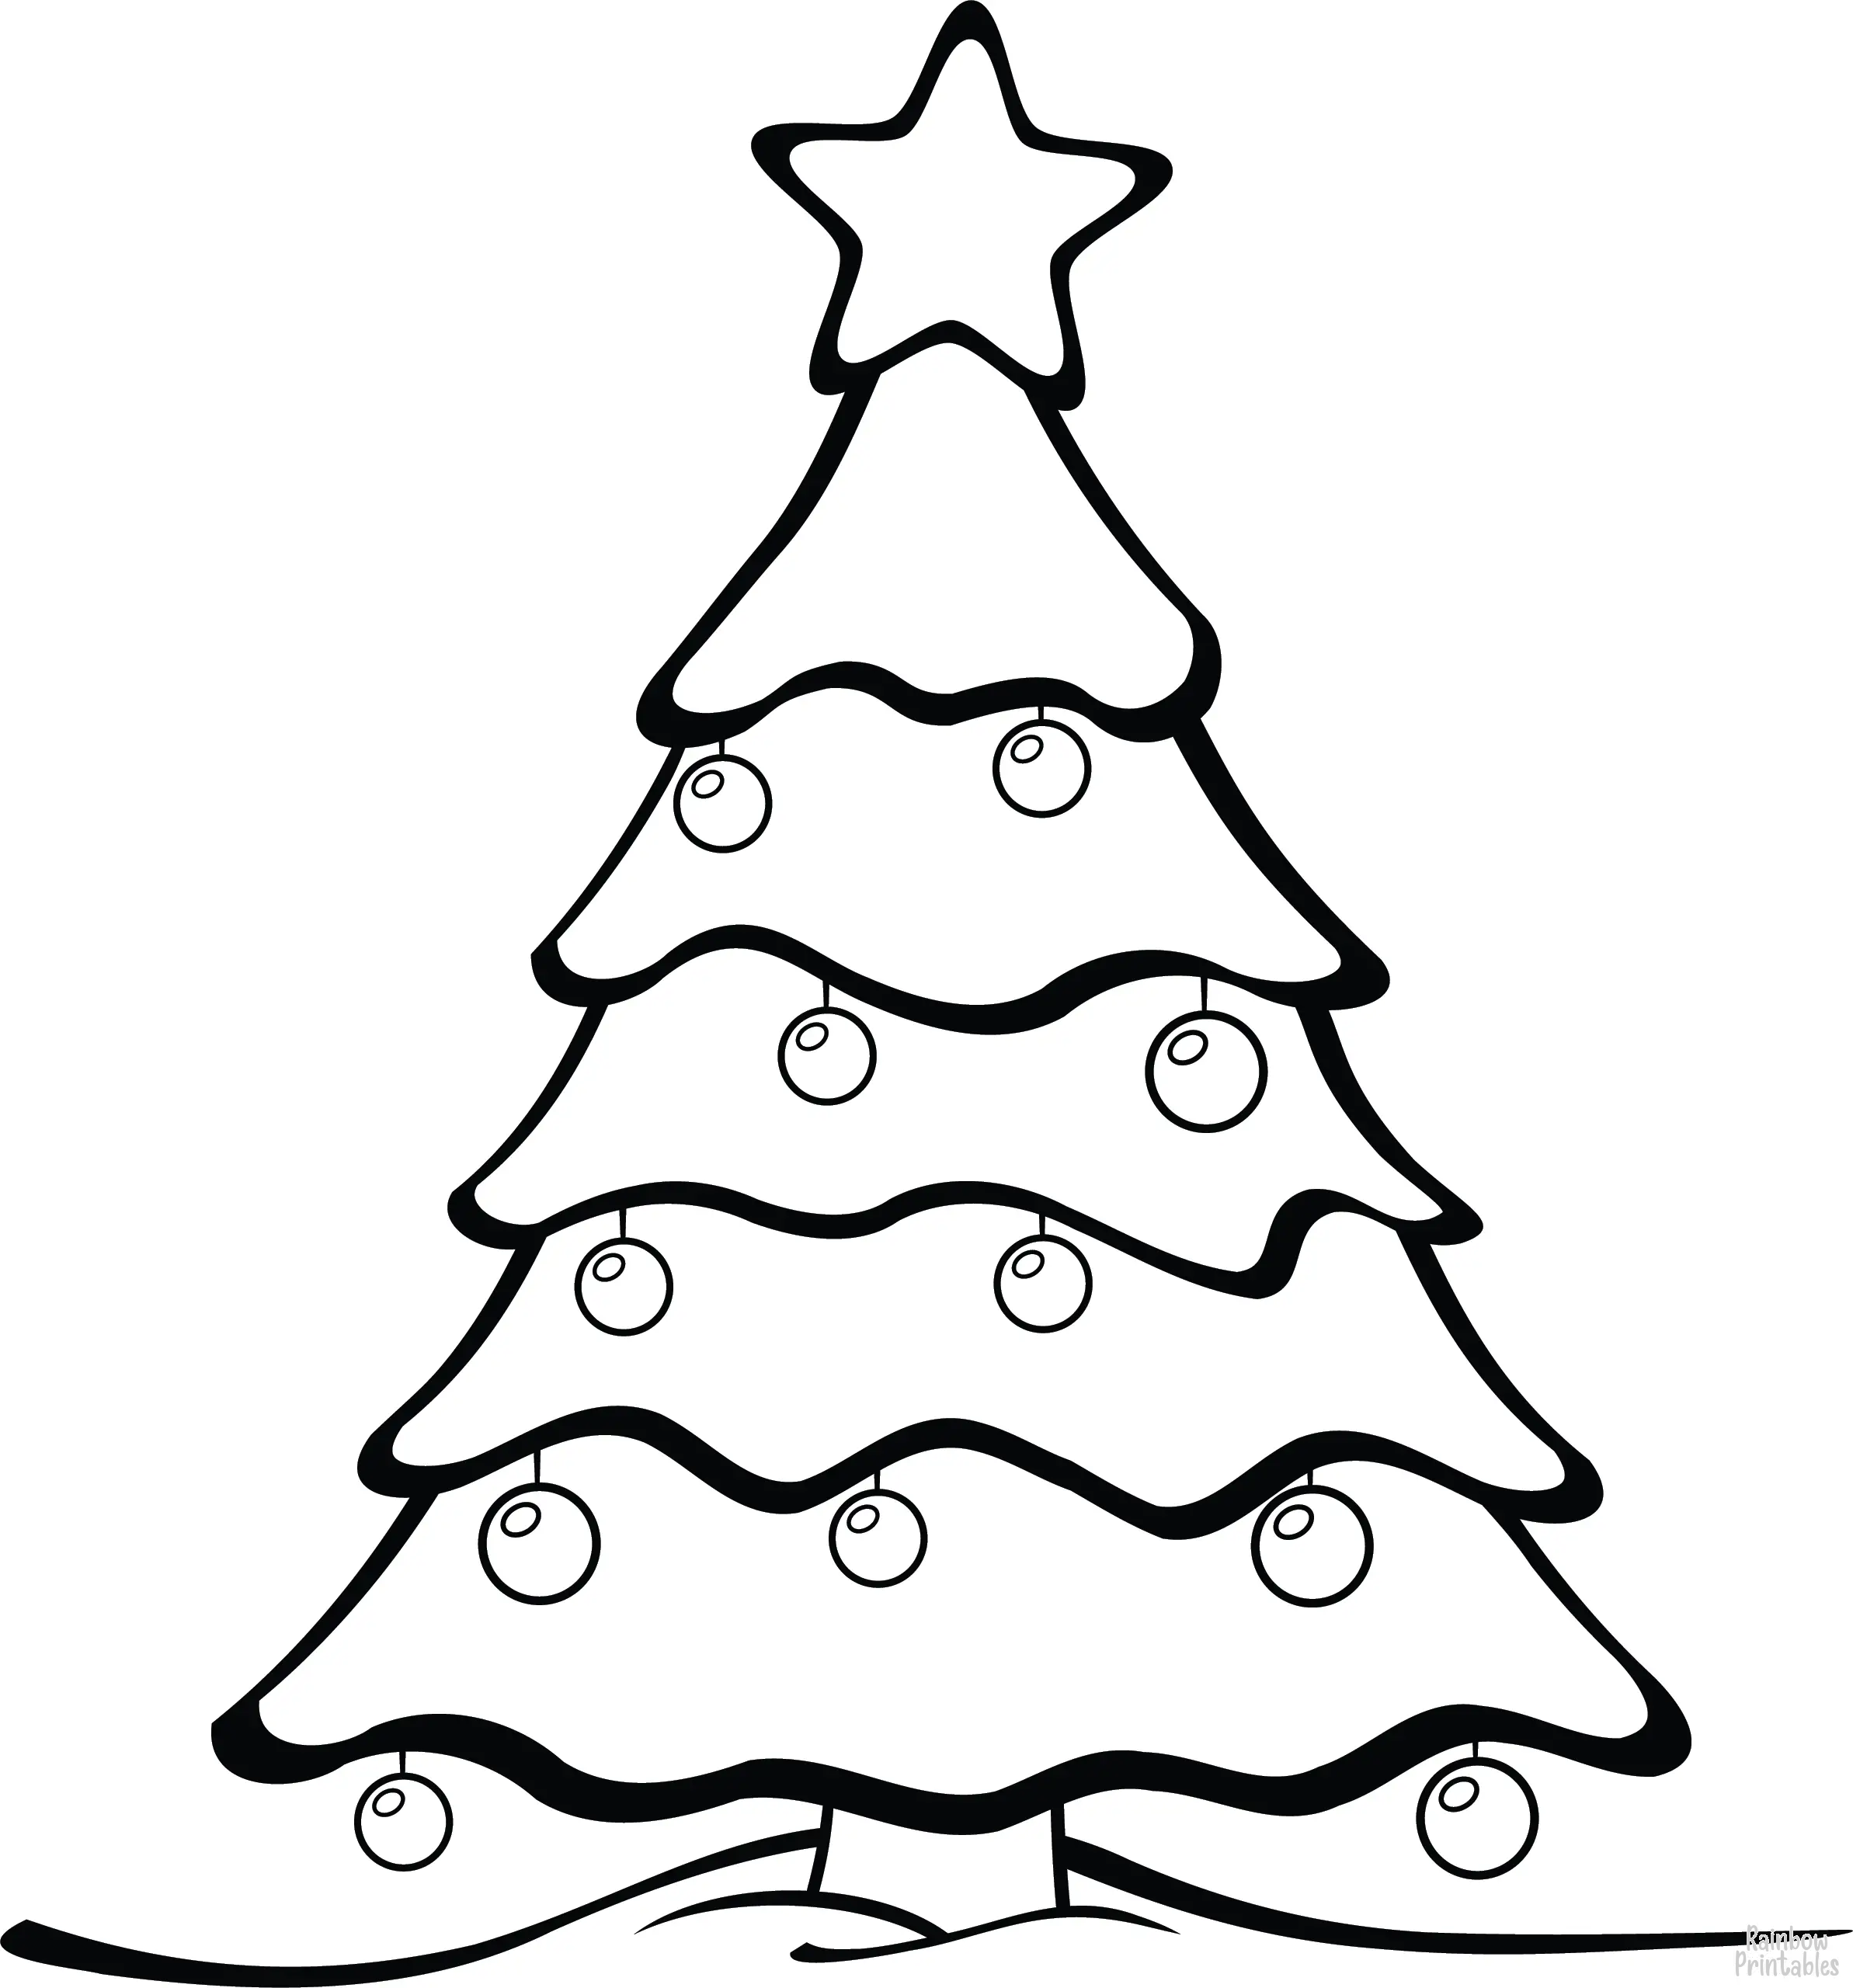 Star Decorated Holiday Tree Coloring Page Christmas Xmas Coloring Activities for Kids